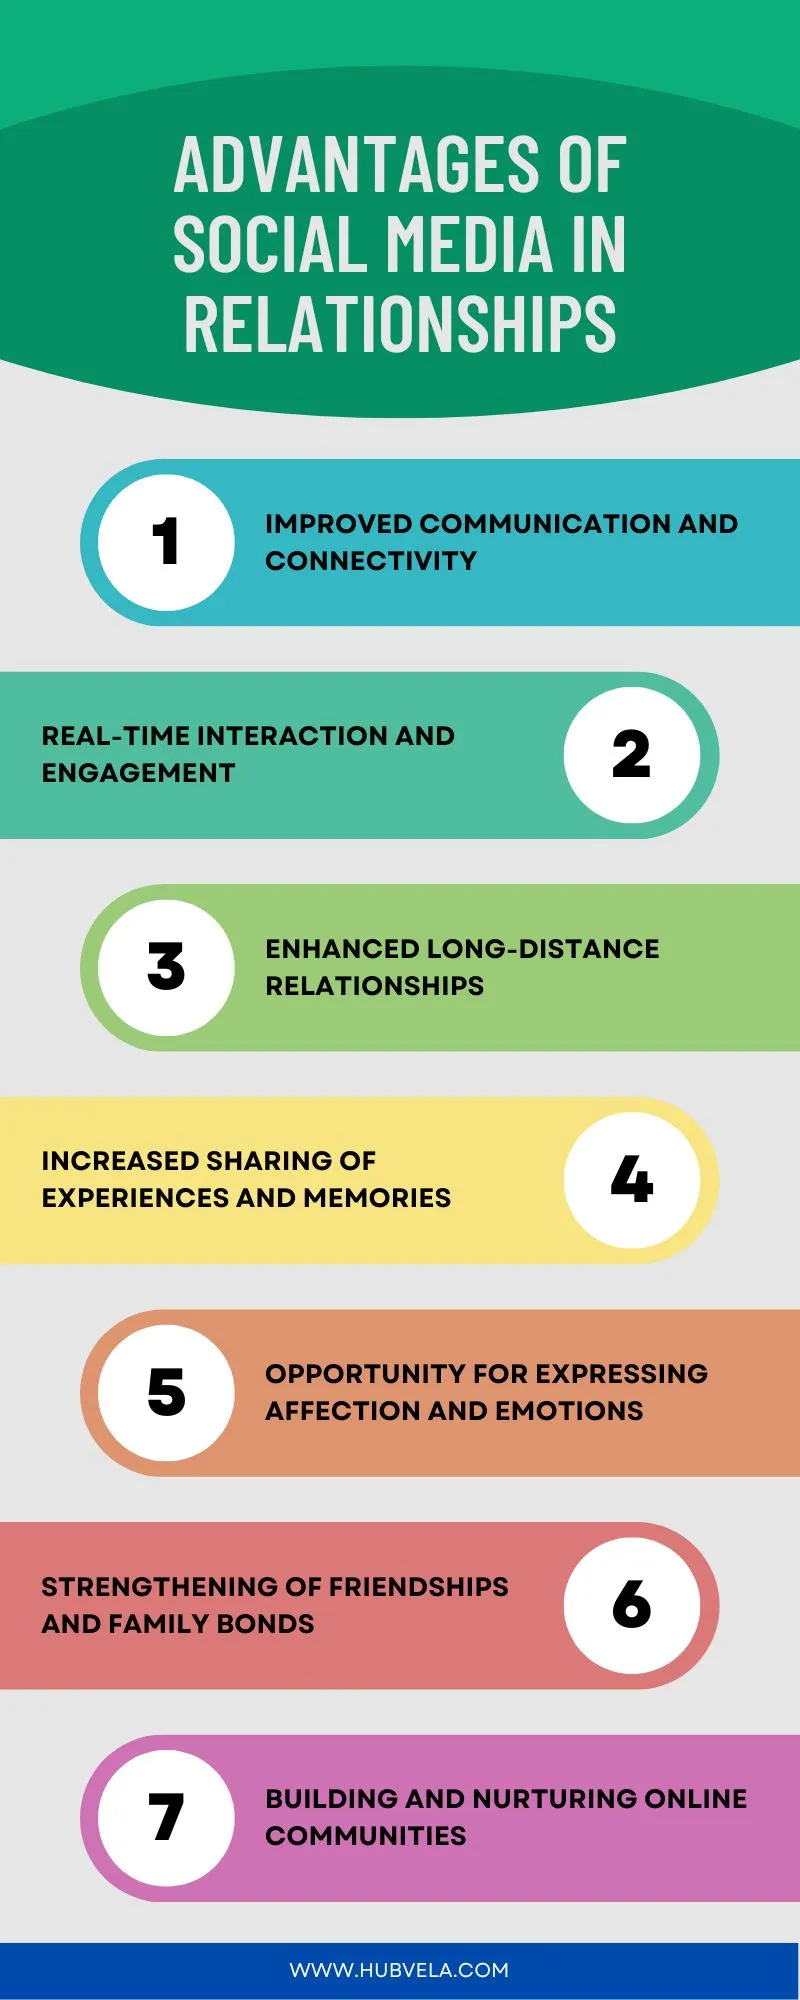 Advantages of Social Media in Relationships infographic